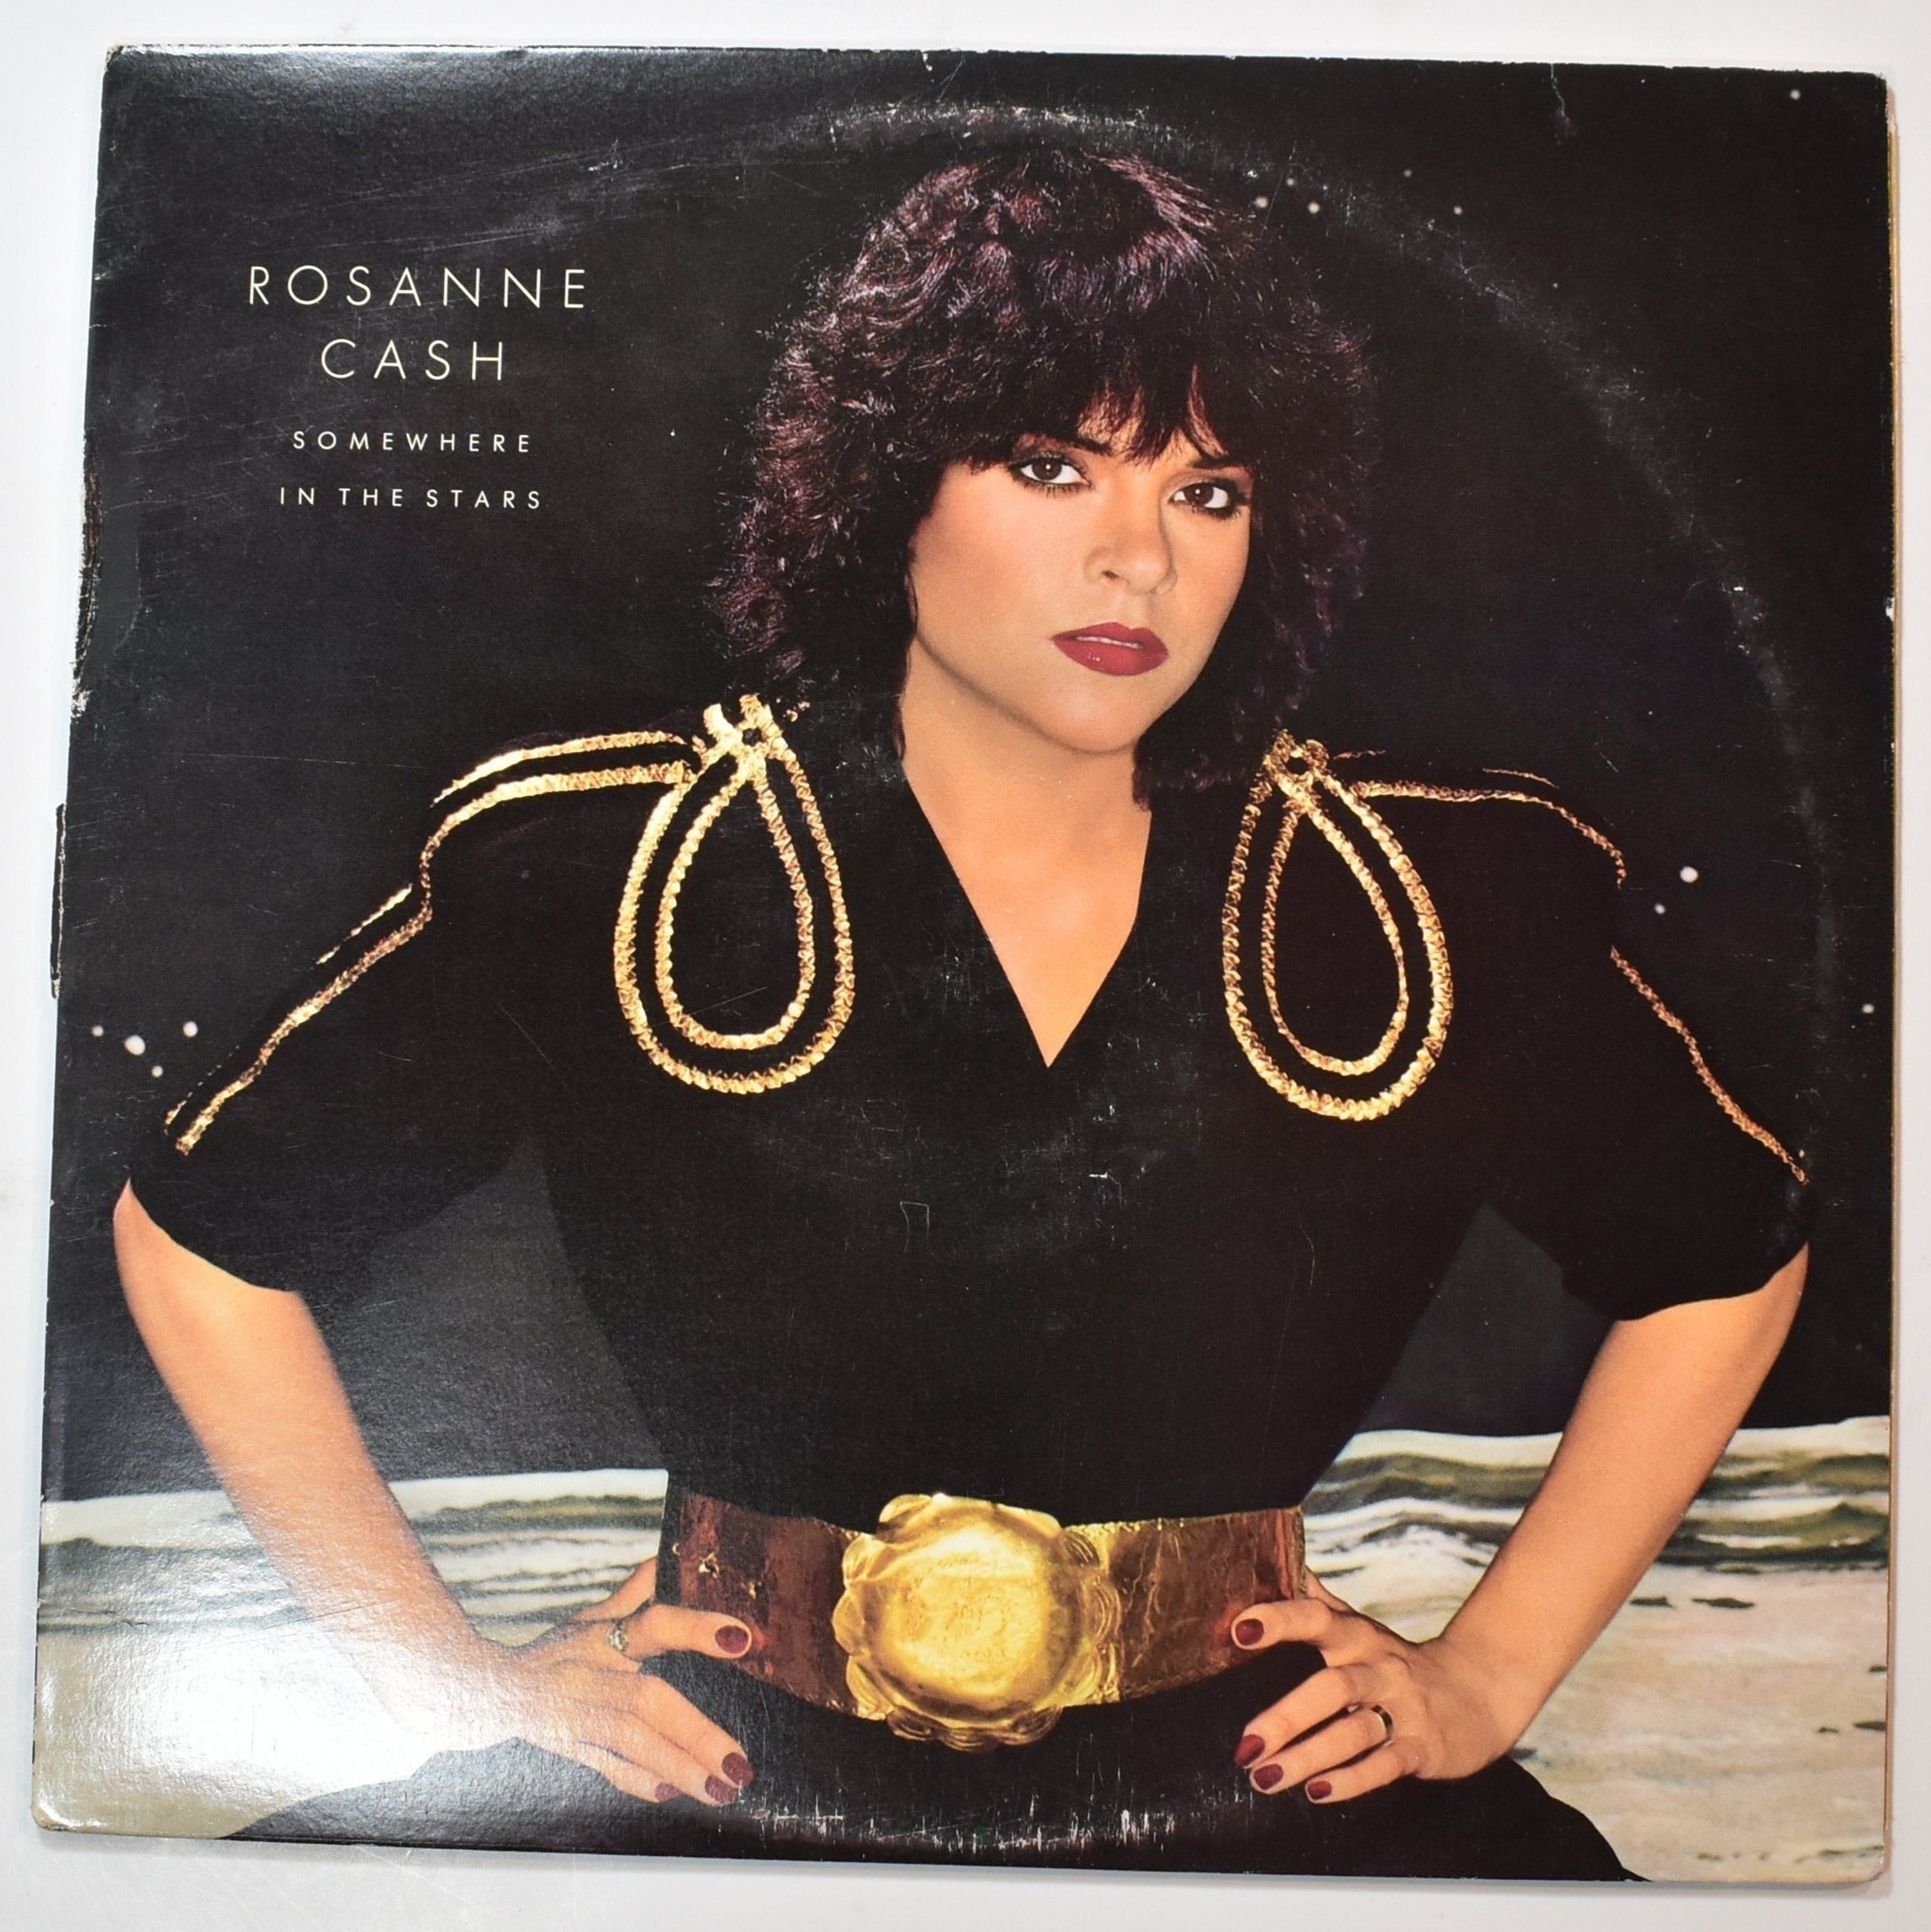 Vinyl Music Record Rosanne Cash Somewhere in the stars used record